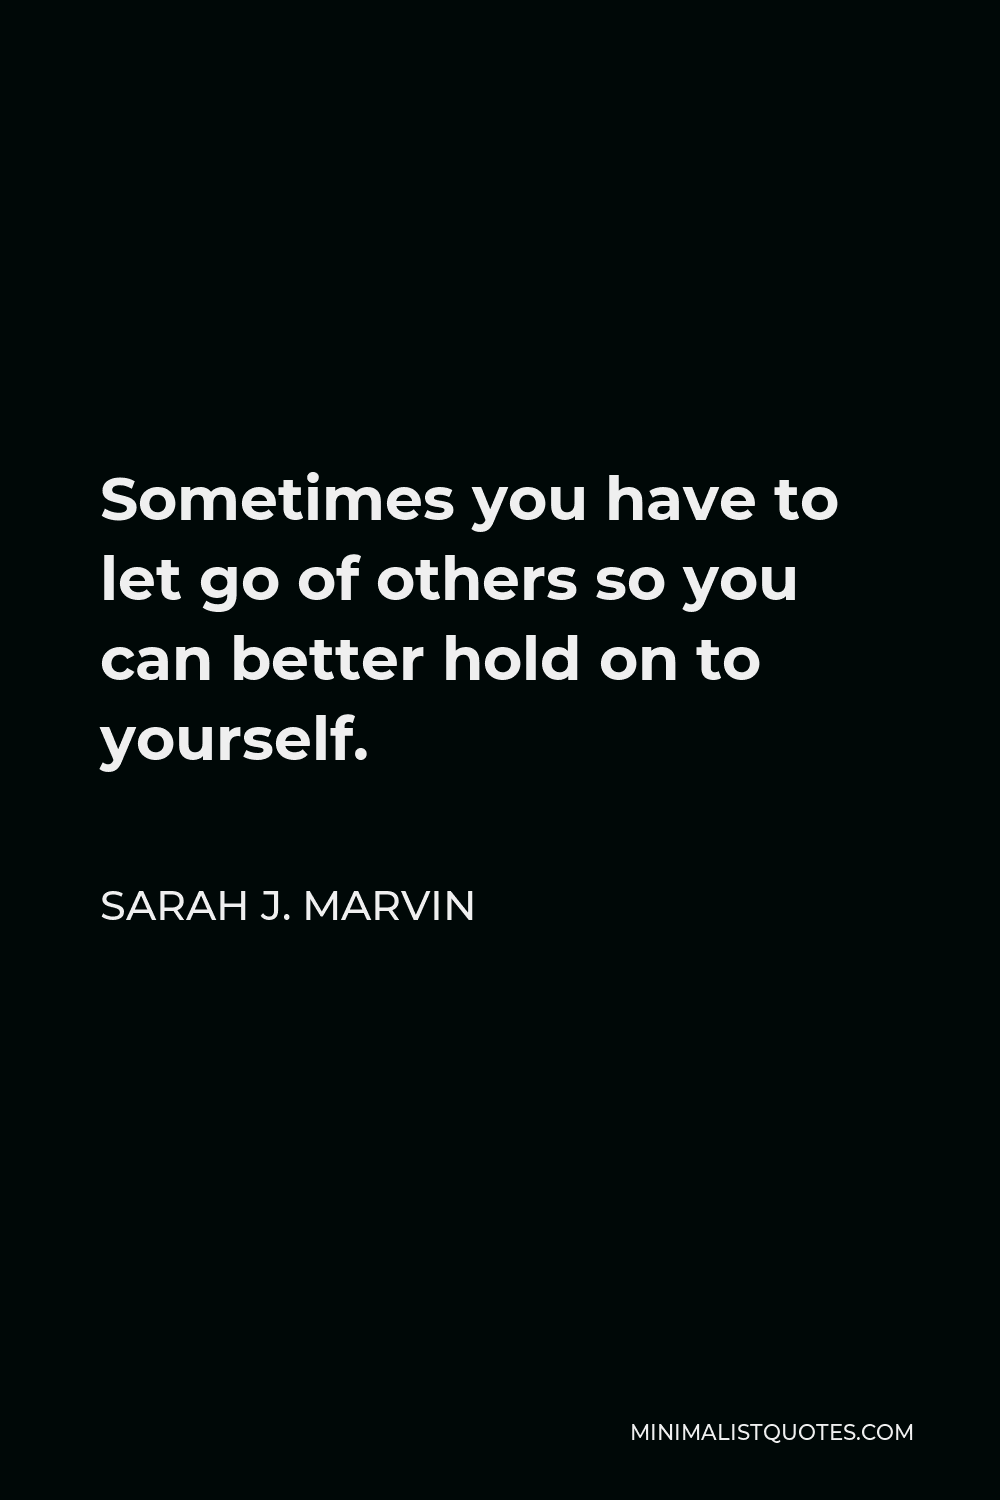 Sarah J. Marvin Quote - Sometimes you have to let go of others so you can better hold on to yourself.